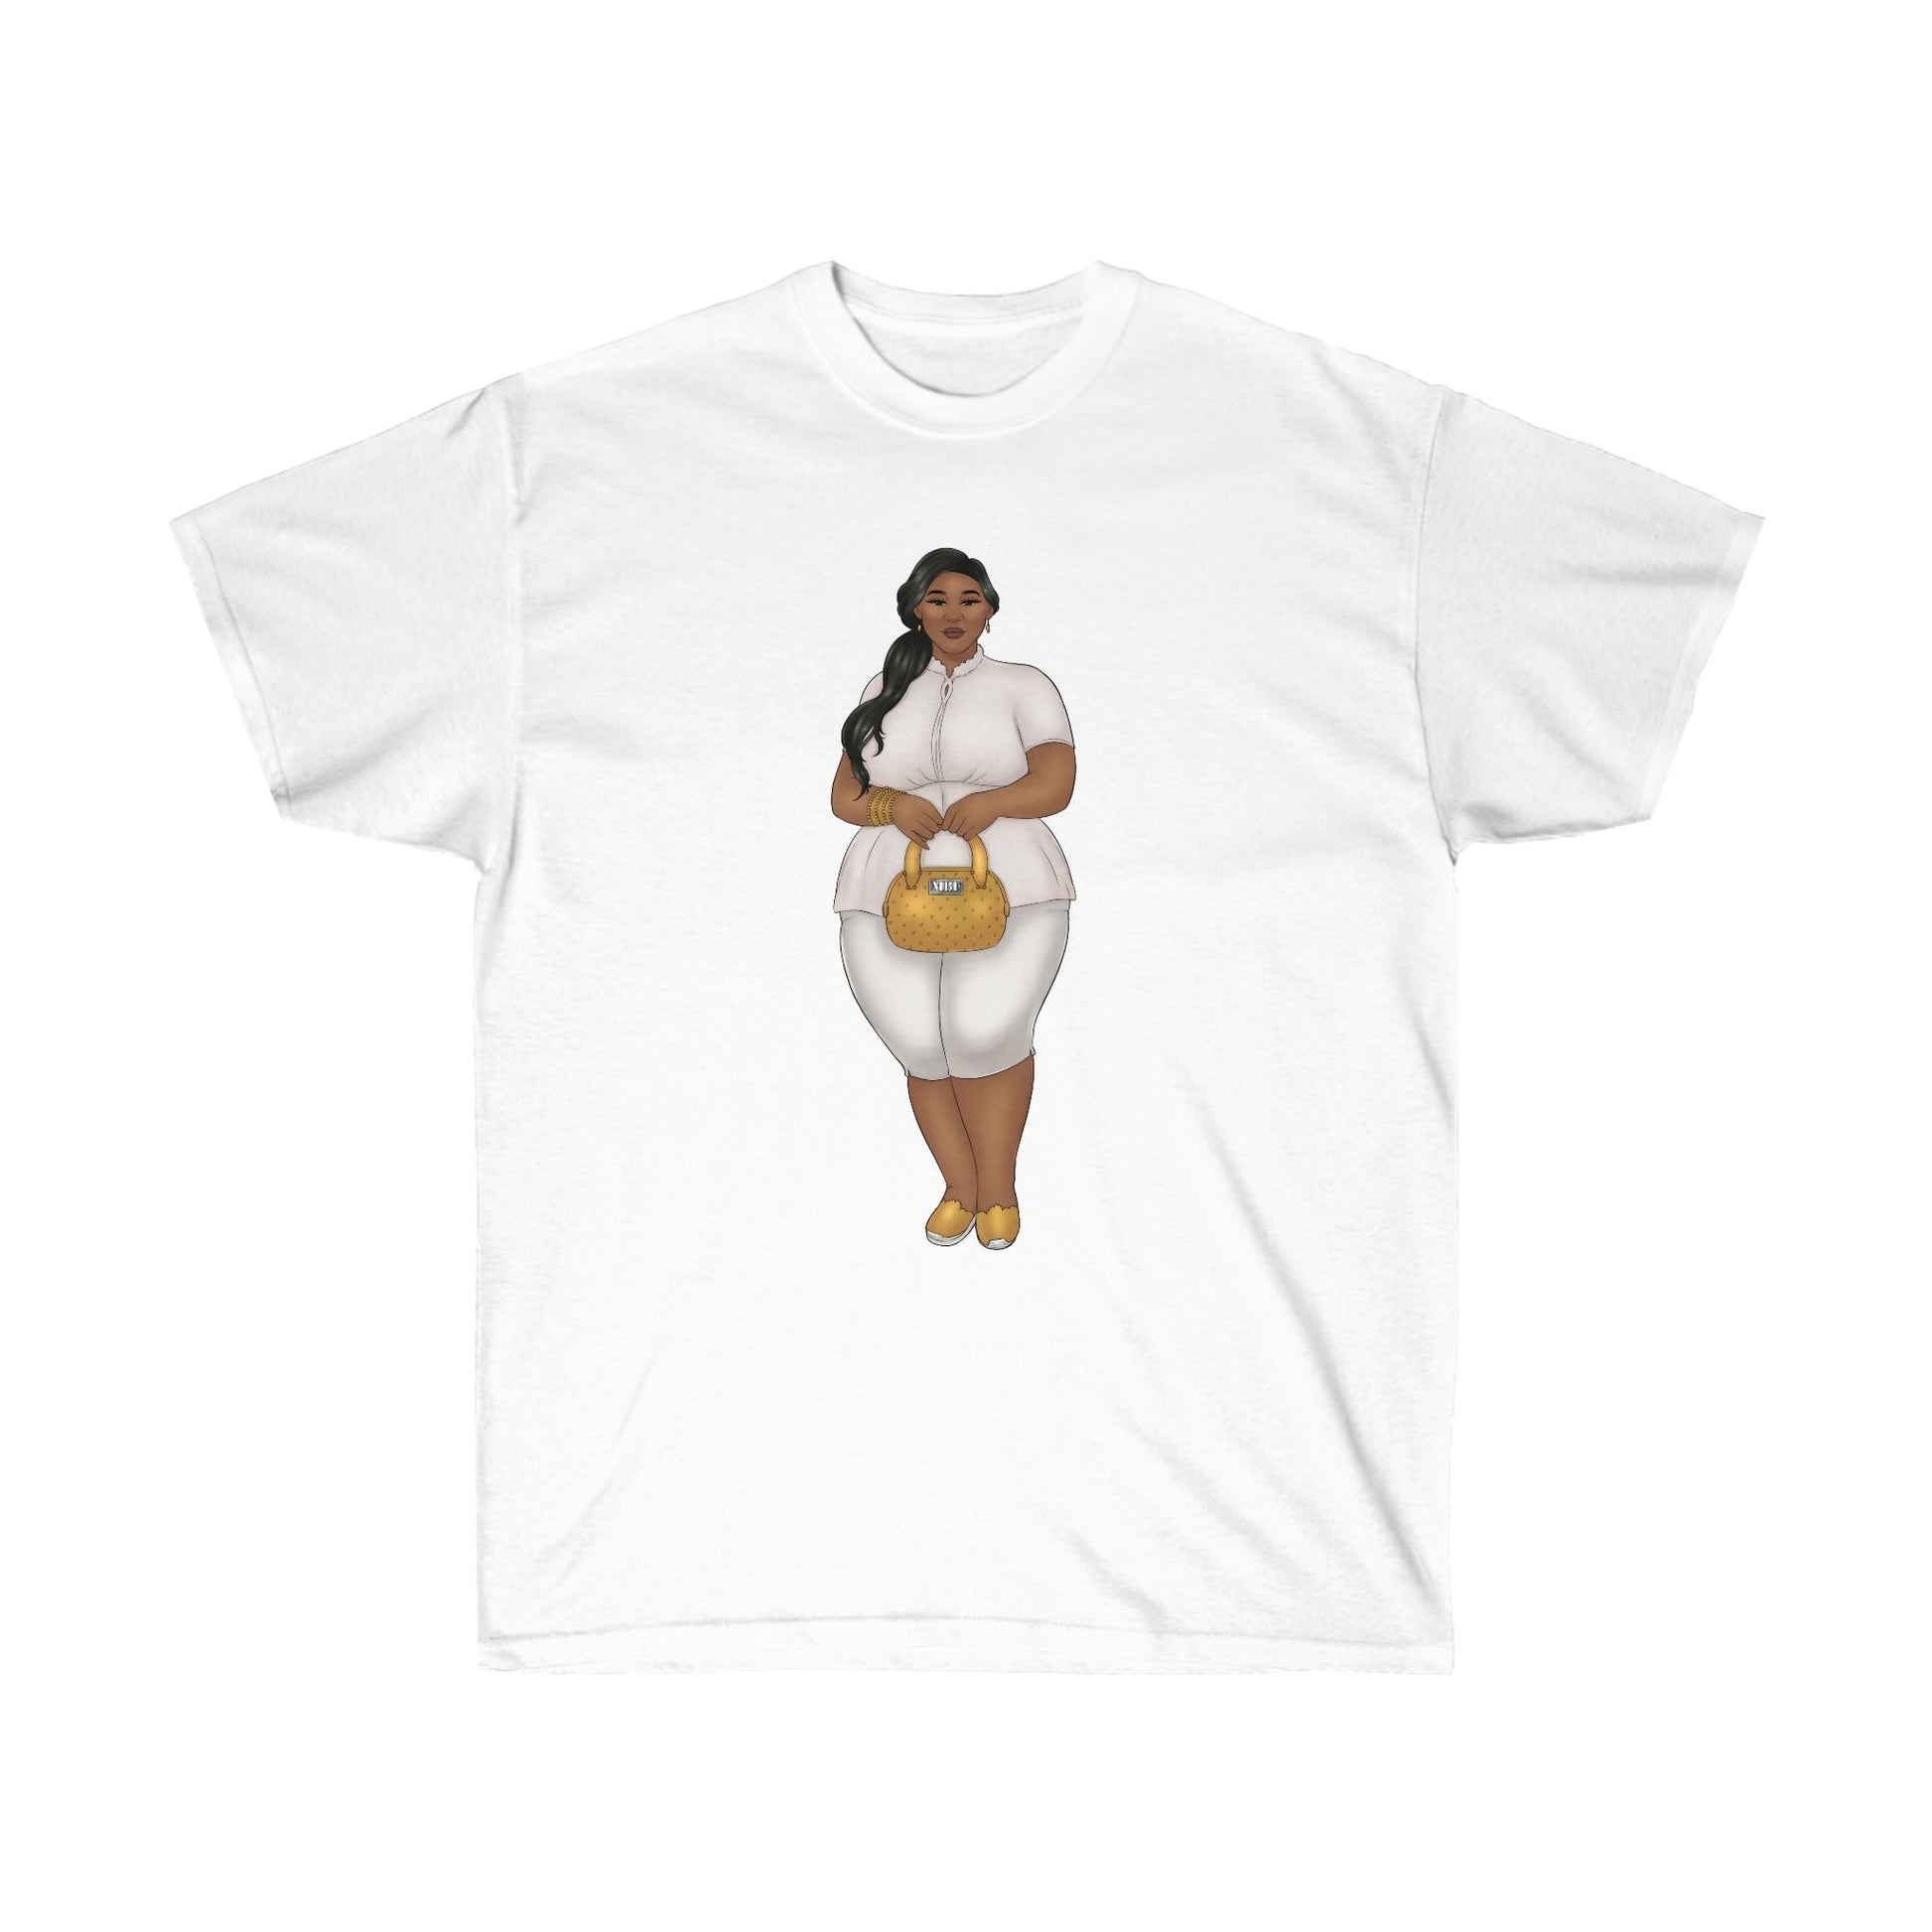 Nicole Show Off Your Fluff Unisex Ultra Cotton Tee S- 5XL T-Shirt Printify White S 